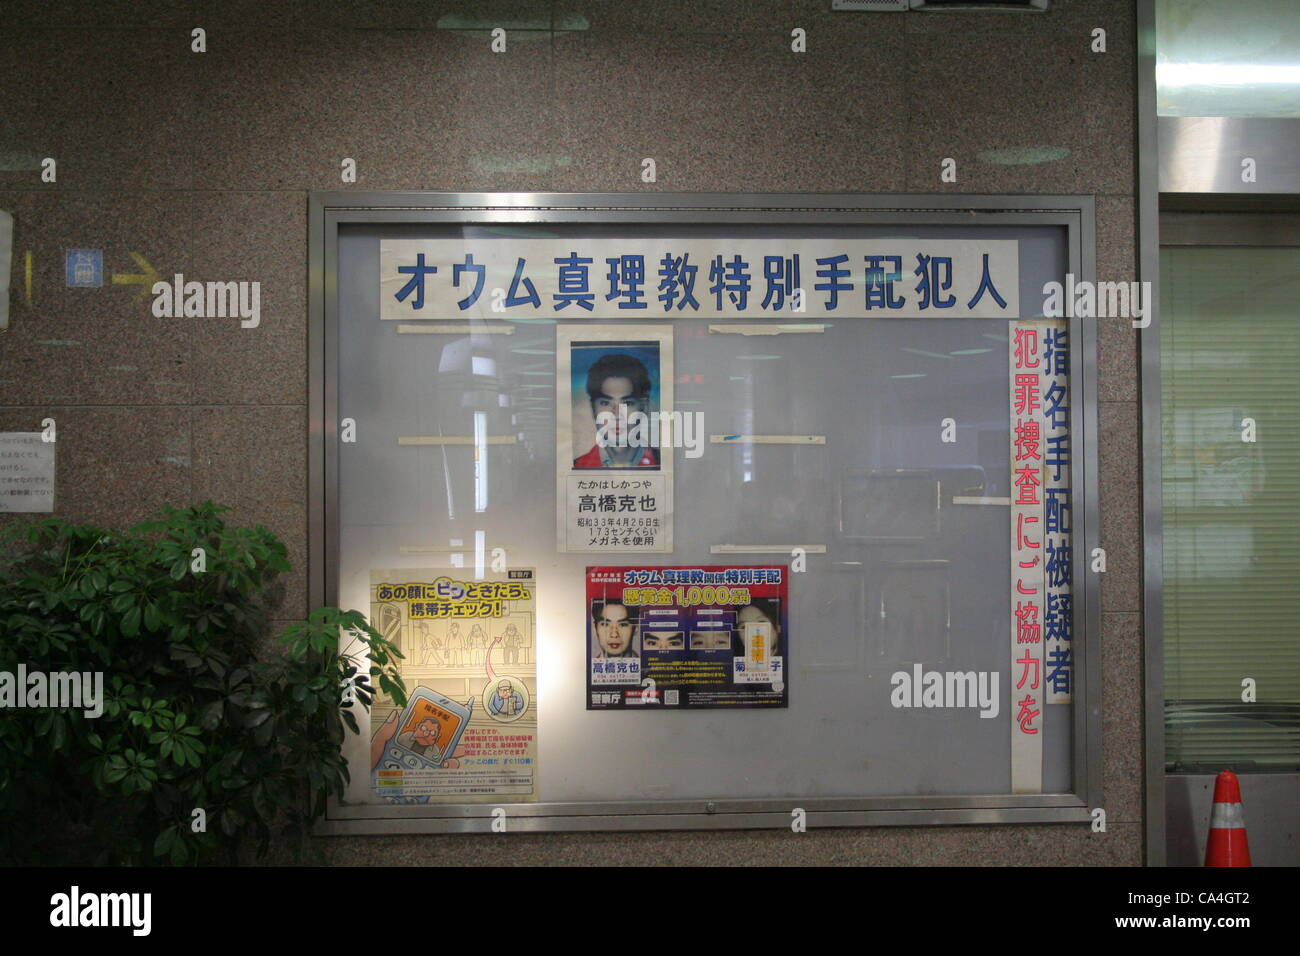 The wanted poster of a former Aum Shinrikyo cult member displayed in Tokyo, Japan. Naoko Kikuchi was arrested for Tokyo subway sarin gas attack, after 17 years on the run on Sunday June 3, 2012. Katsuya Takahashi is the only remaining fugitive having 10 million yen bounty on his head. Stock Photo